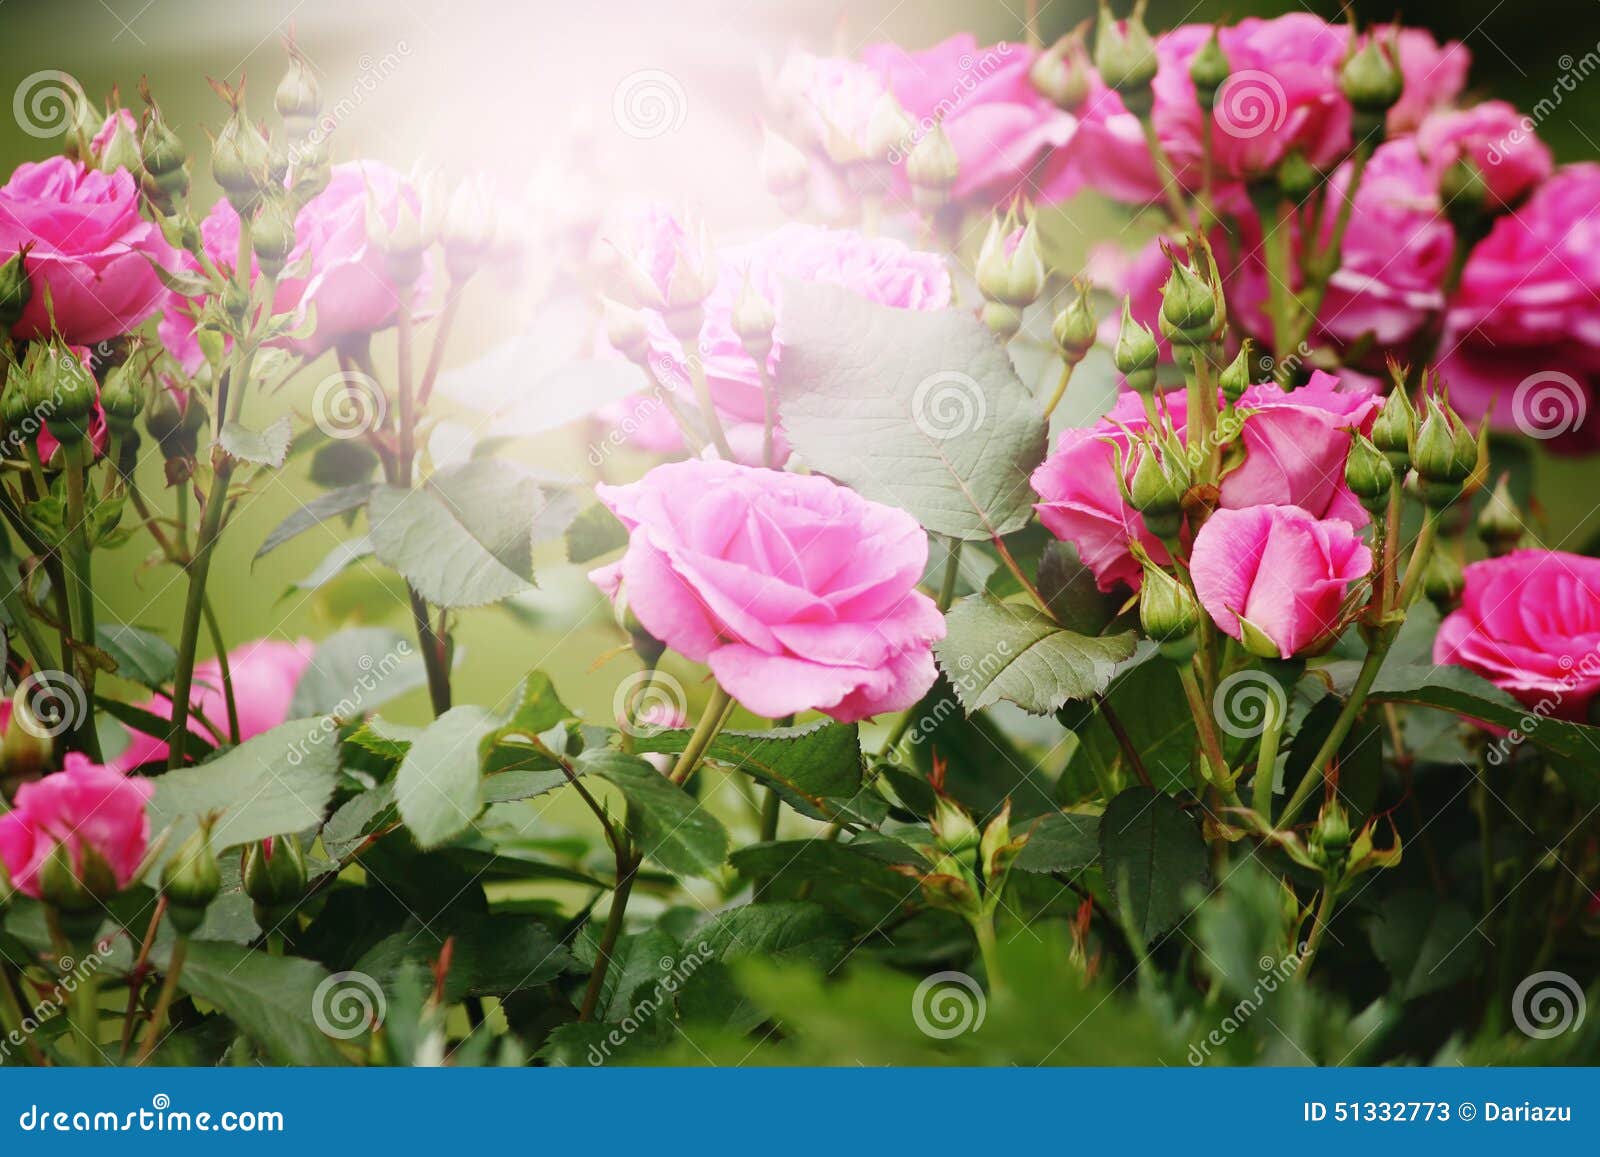 Beautiful Pink Roses in Sun Light Stock Image - Image of bloom ...